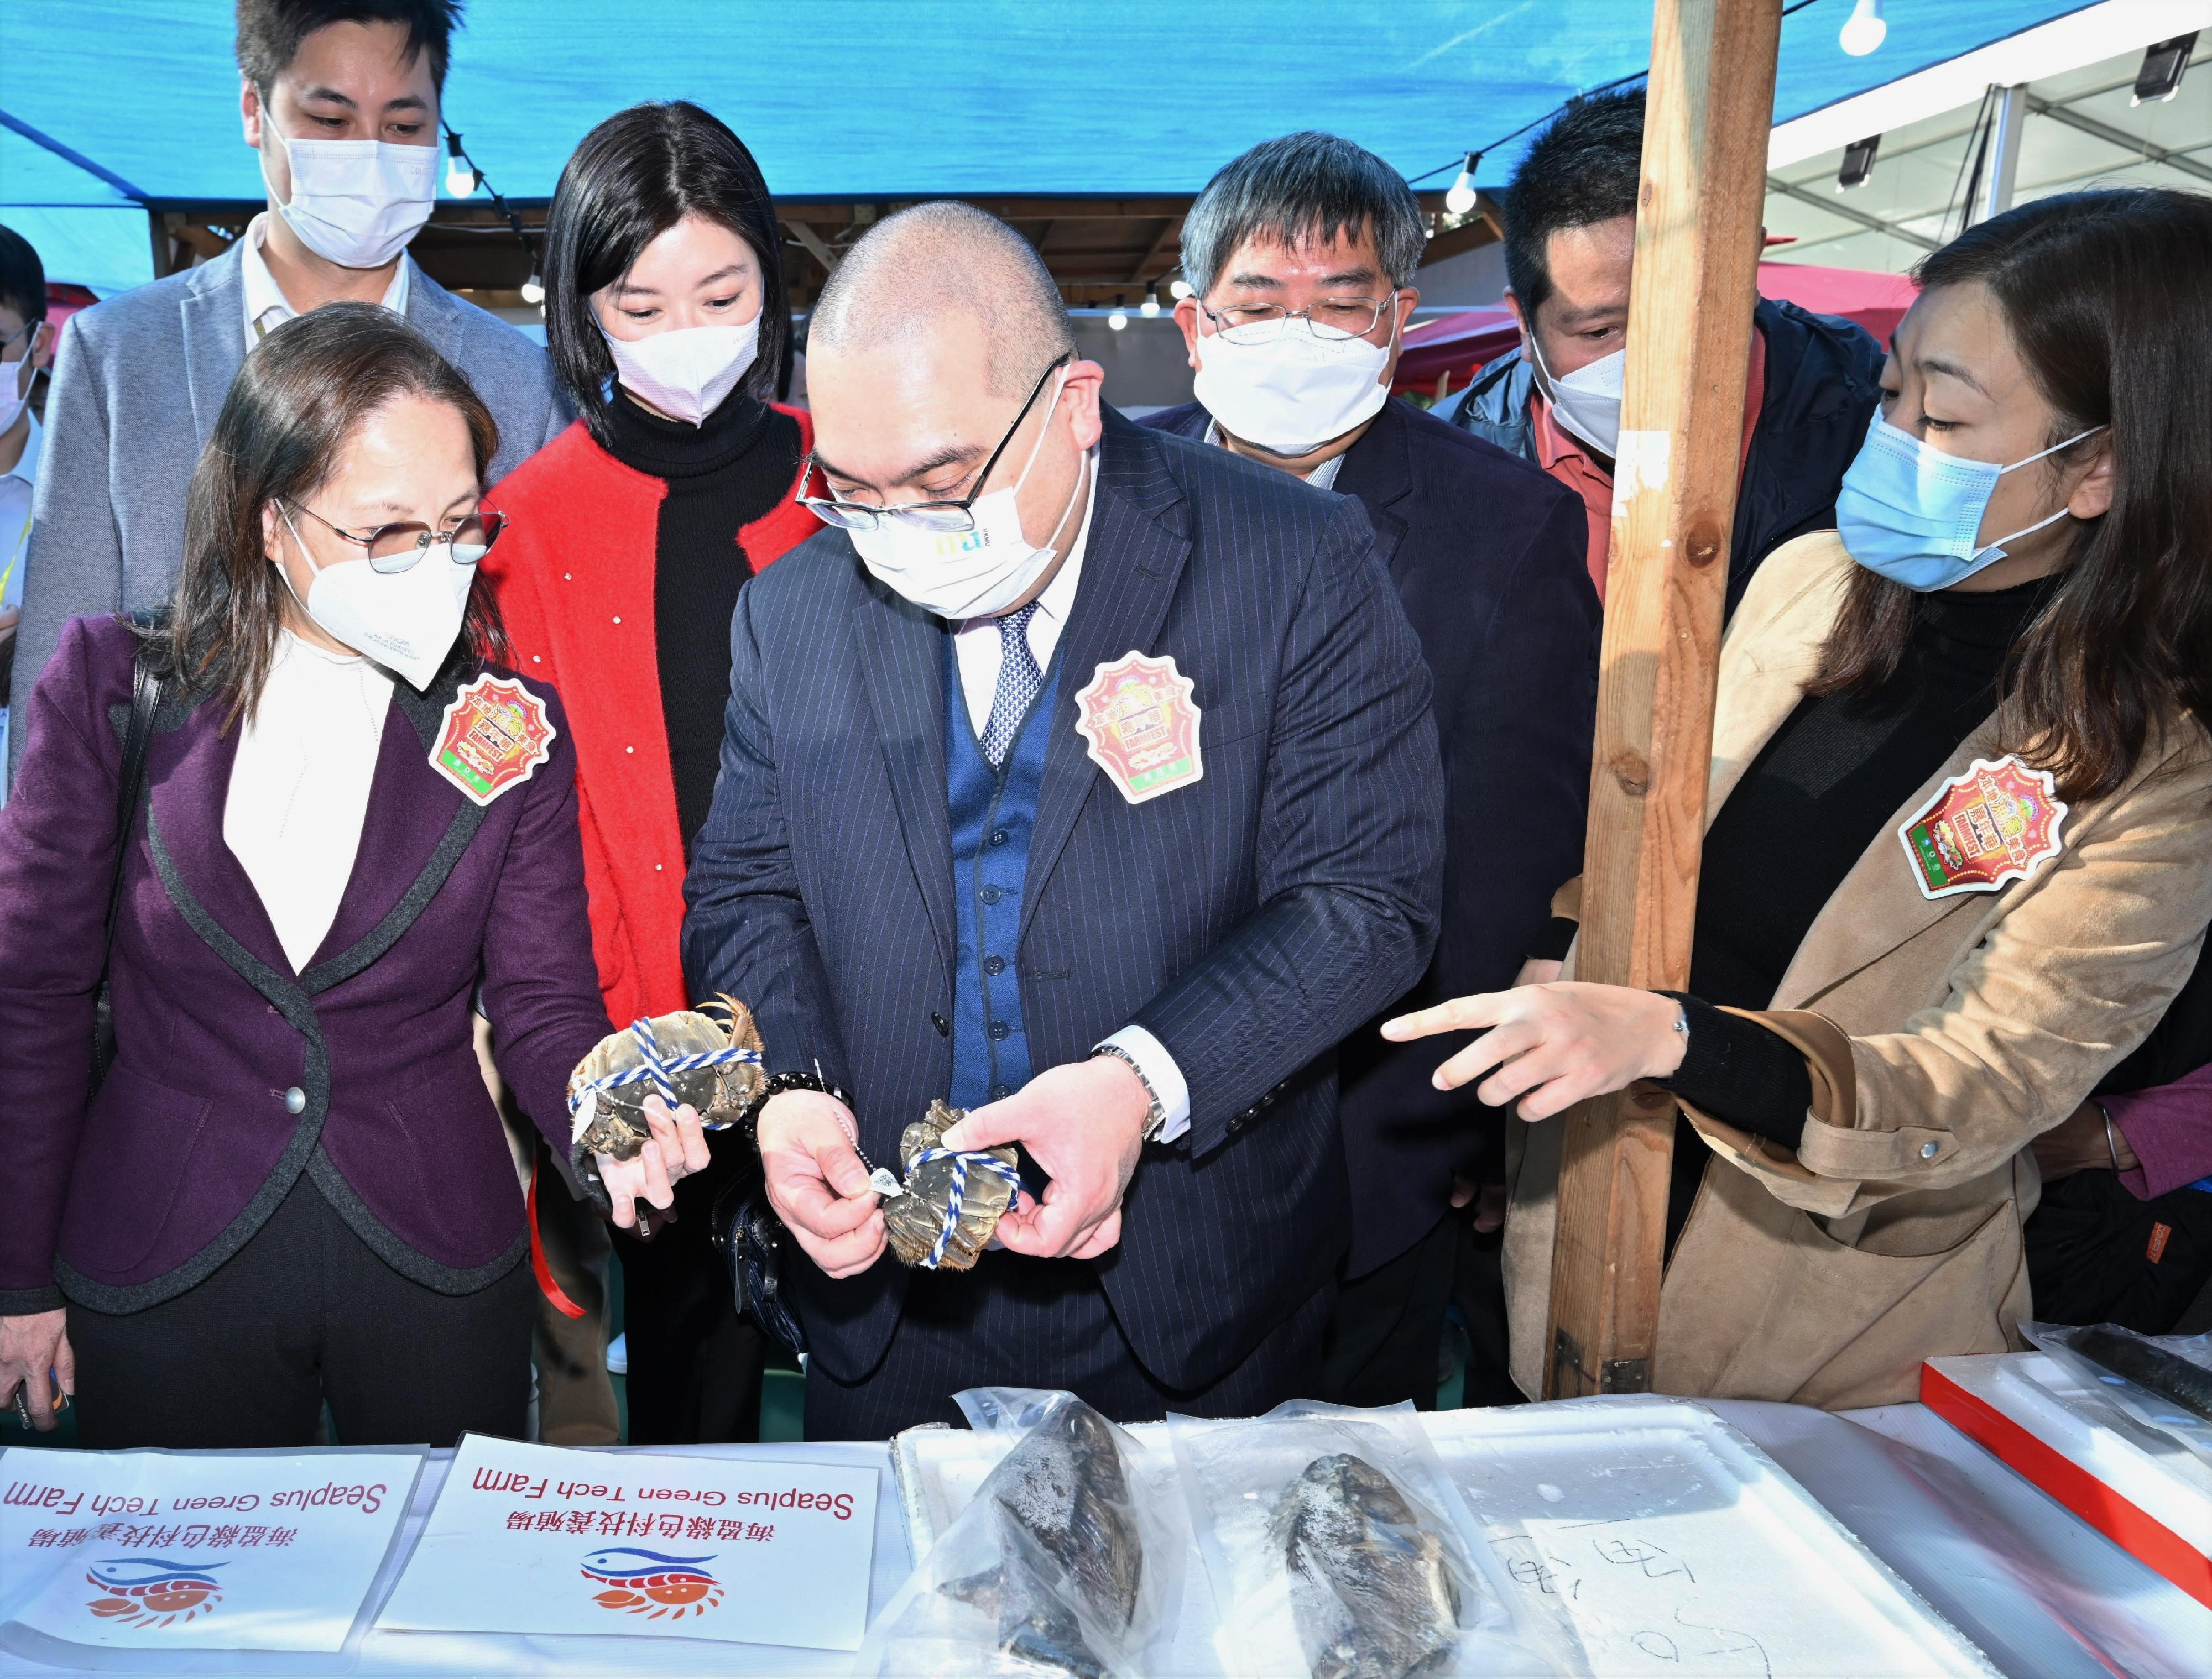 The 17th FarmFest is being held at Fa Hui Park in Mong Kok for three consecutive days between today (December 25) and December 27 to showcase a variety of local agricultural and fisheries products and other goods. Photo shows the Under Secretary for Environment and Ecology, Miss Diane Wong (front row, first left); the Chairman of the Organising Committee of FarmFest, Dr Eric Lau (front row, centre); Legislative Council members Mr Steven Ho (back row, first left) and Ms Yung Hoi-yan (back row, second left); the Director of Agriculture, Fisheries and Conservation, Dr Leung Siu-fai (back row, second right); being briefed on local fisheries products.